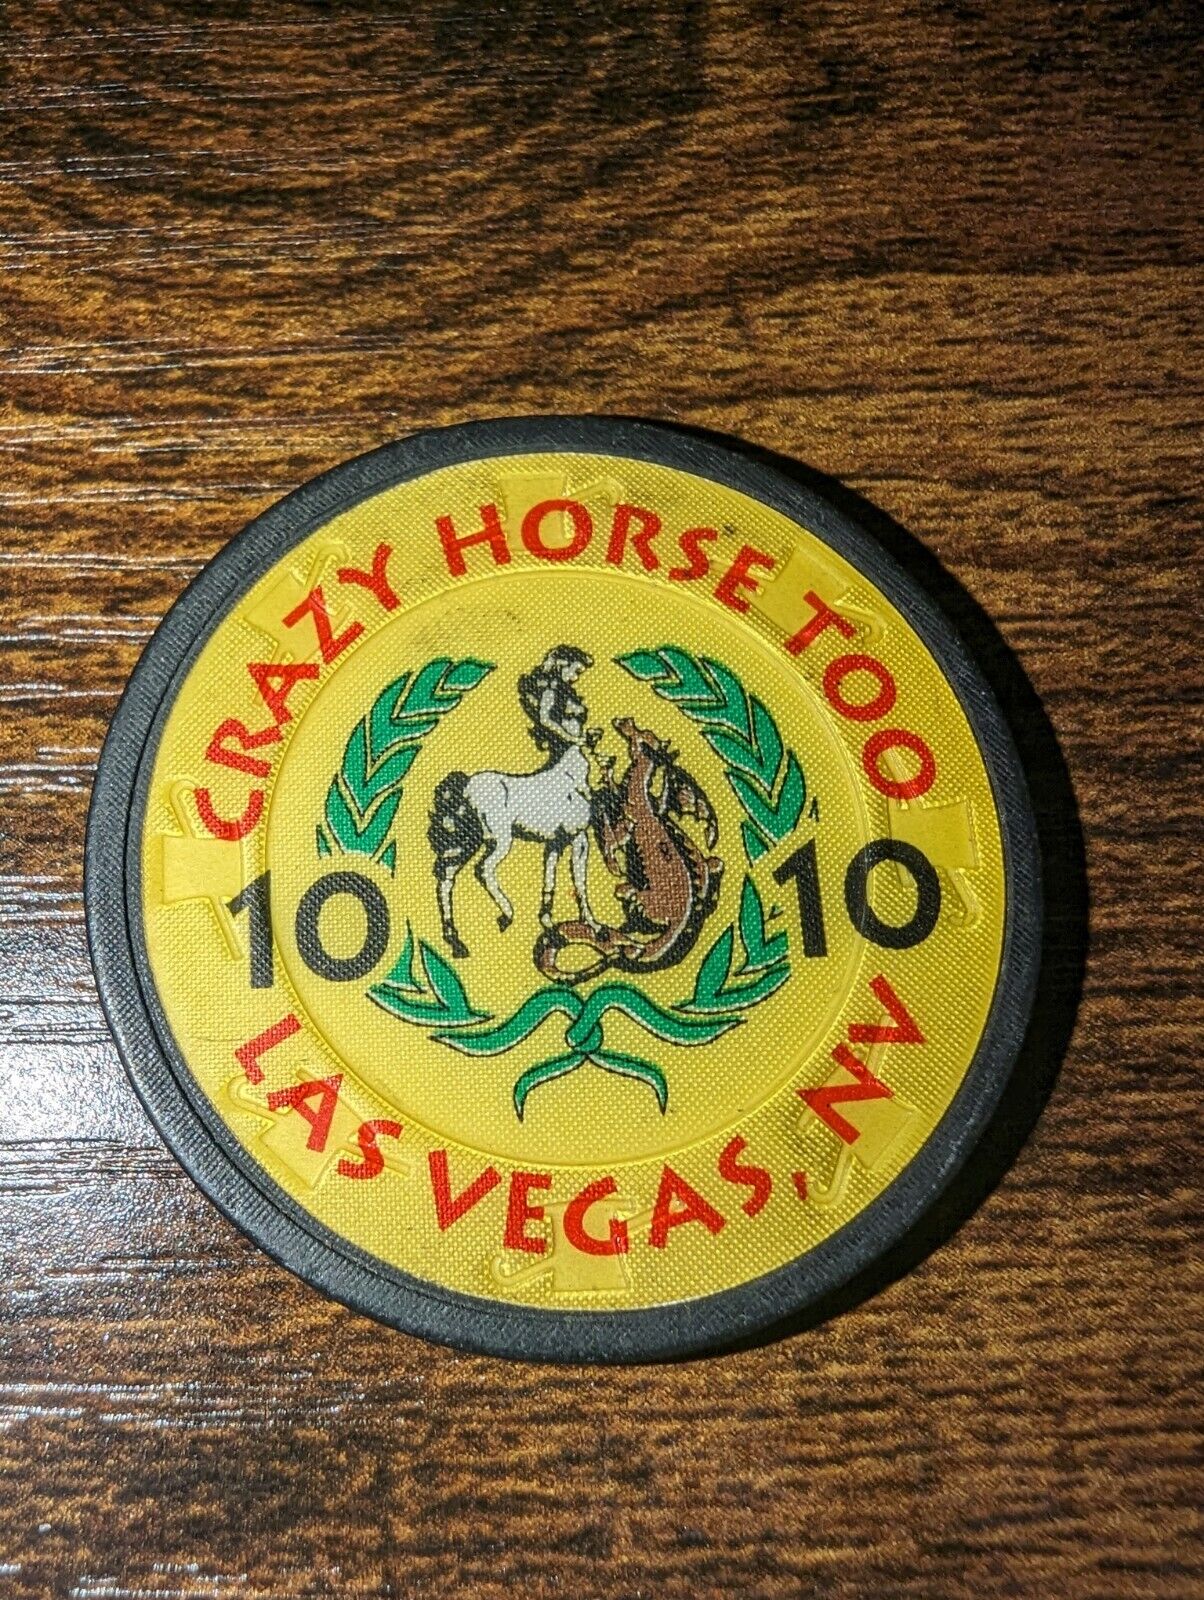 ONE CRAZY HORSE TOO CASINO POKER CHIP $10 CHIP LAS VEGAS TWO 2